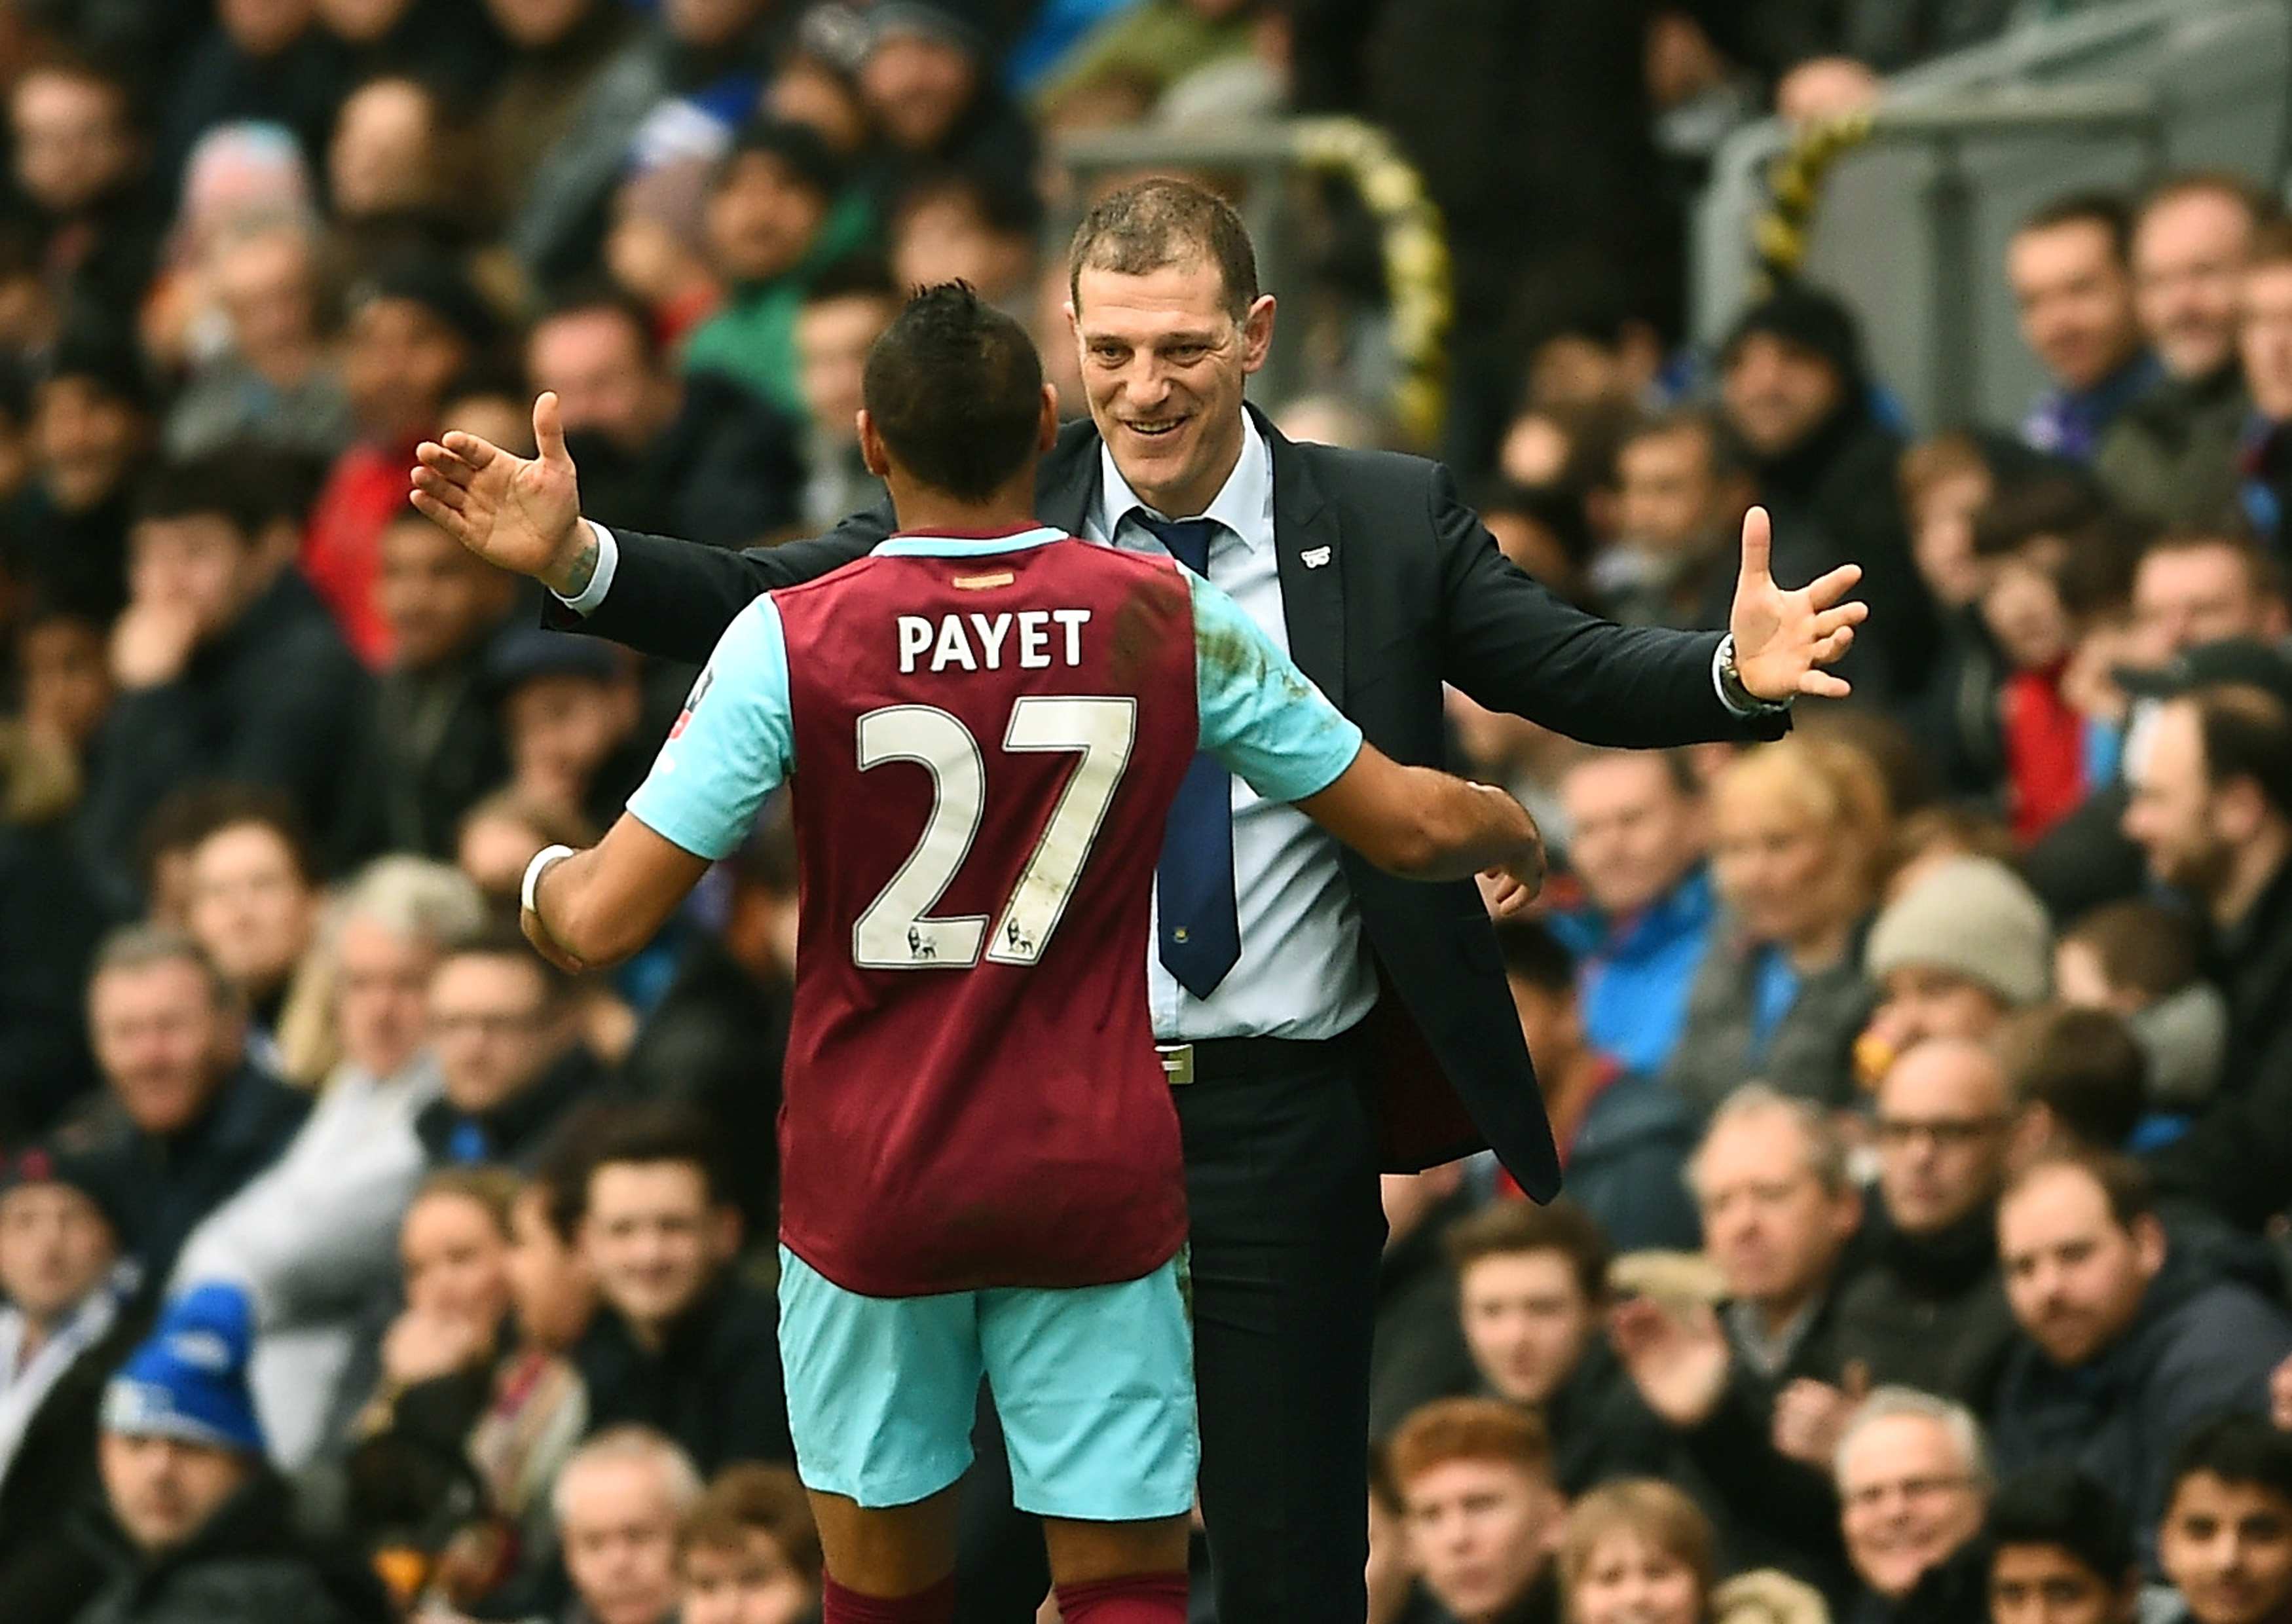 Bilic feels ‘let down’ and ‘angry’ about Dimitri Payet’s transfer request